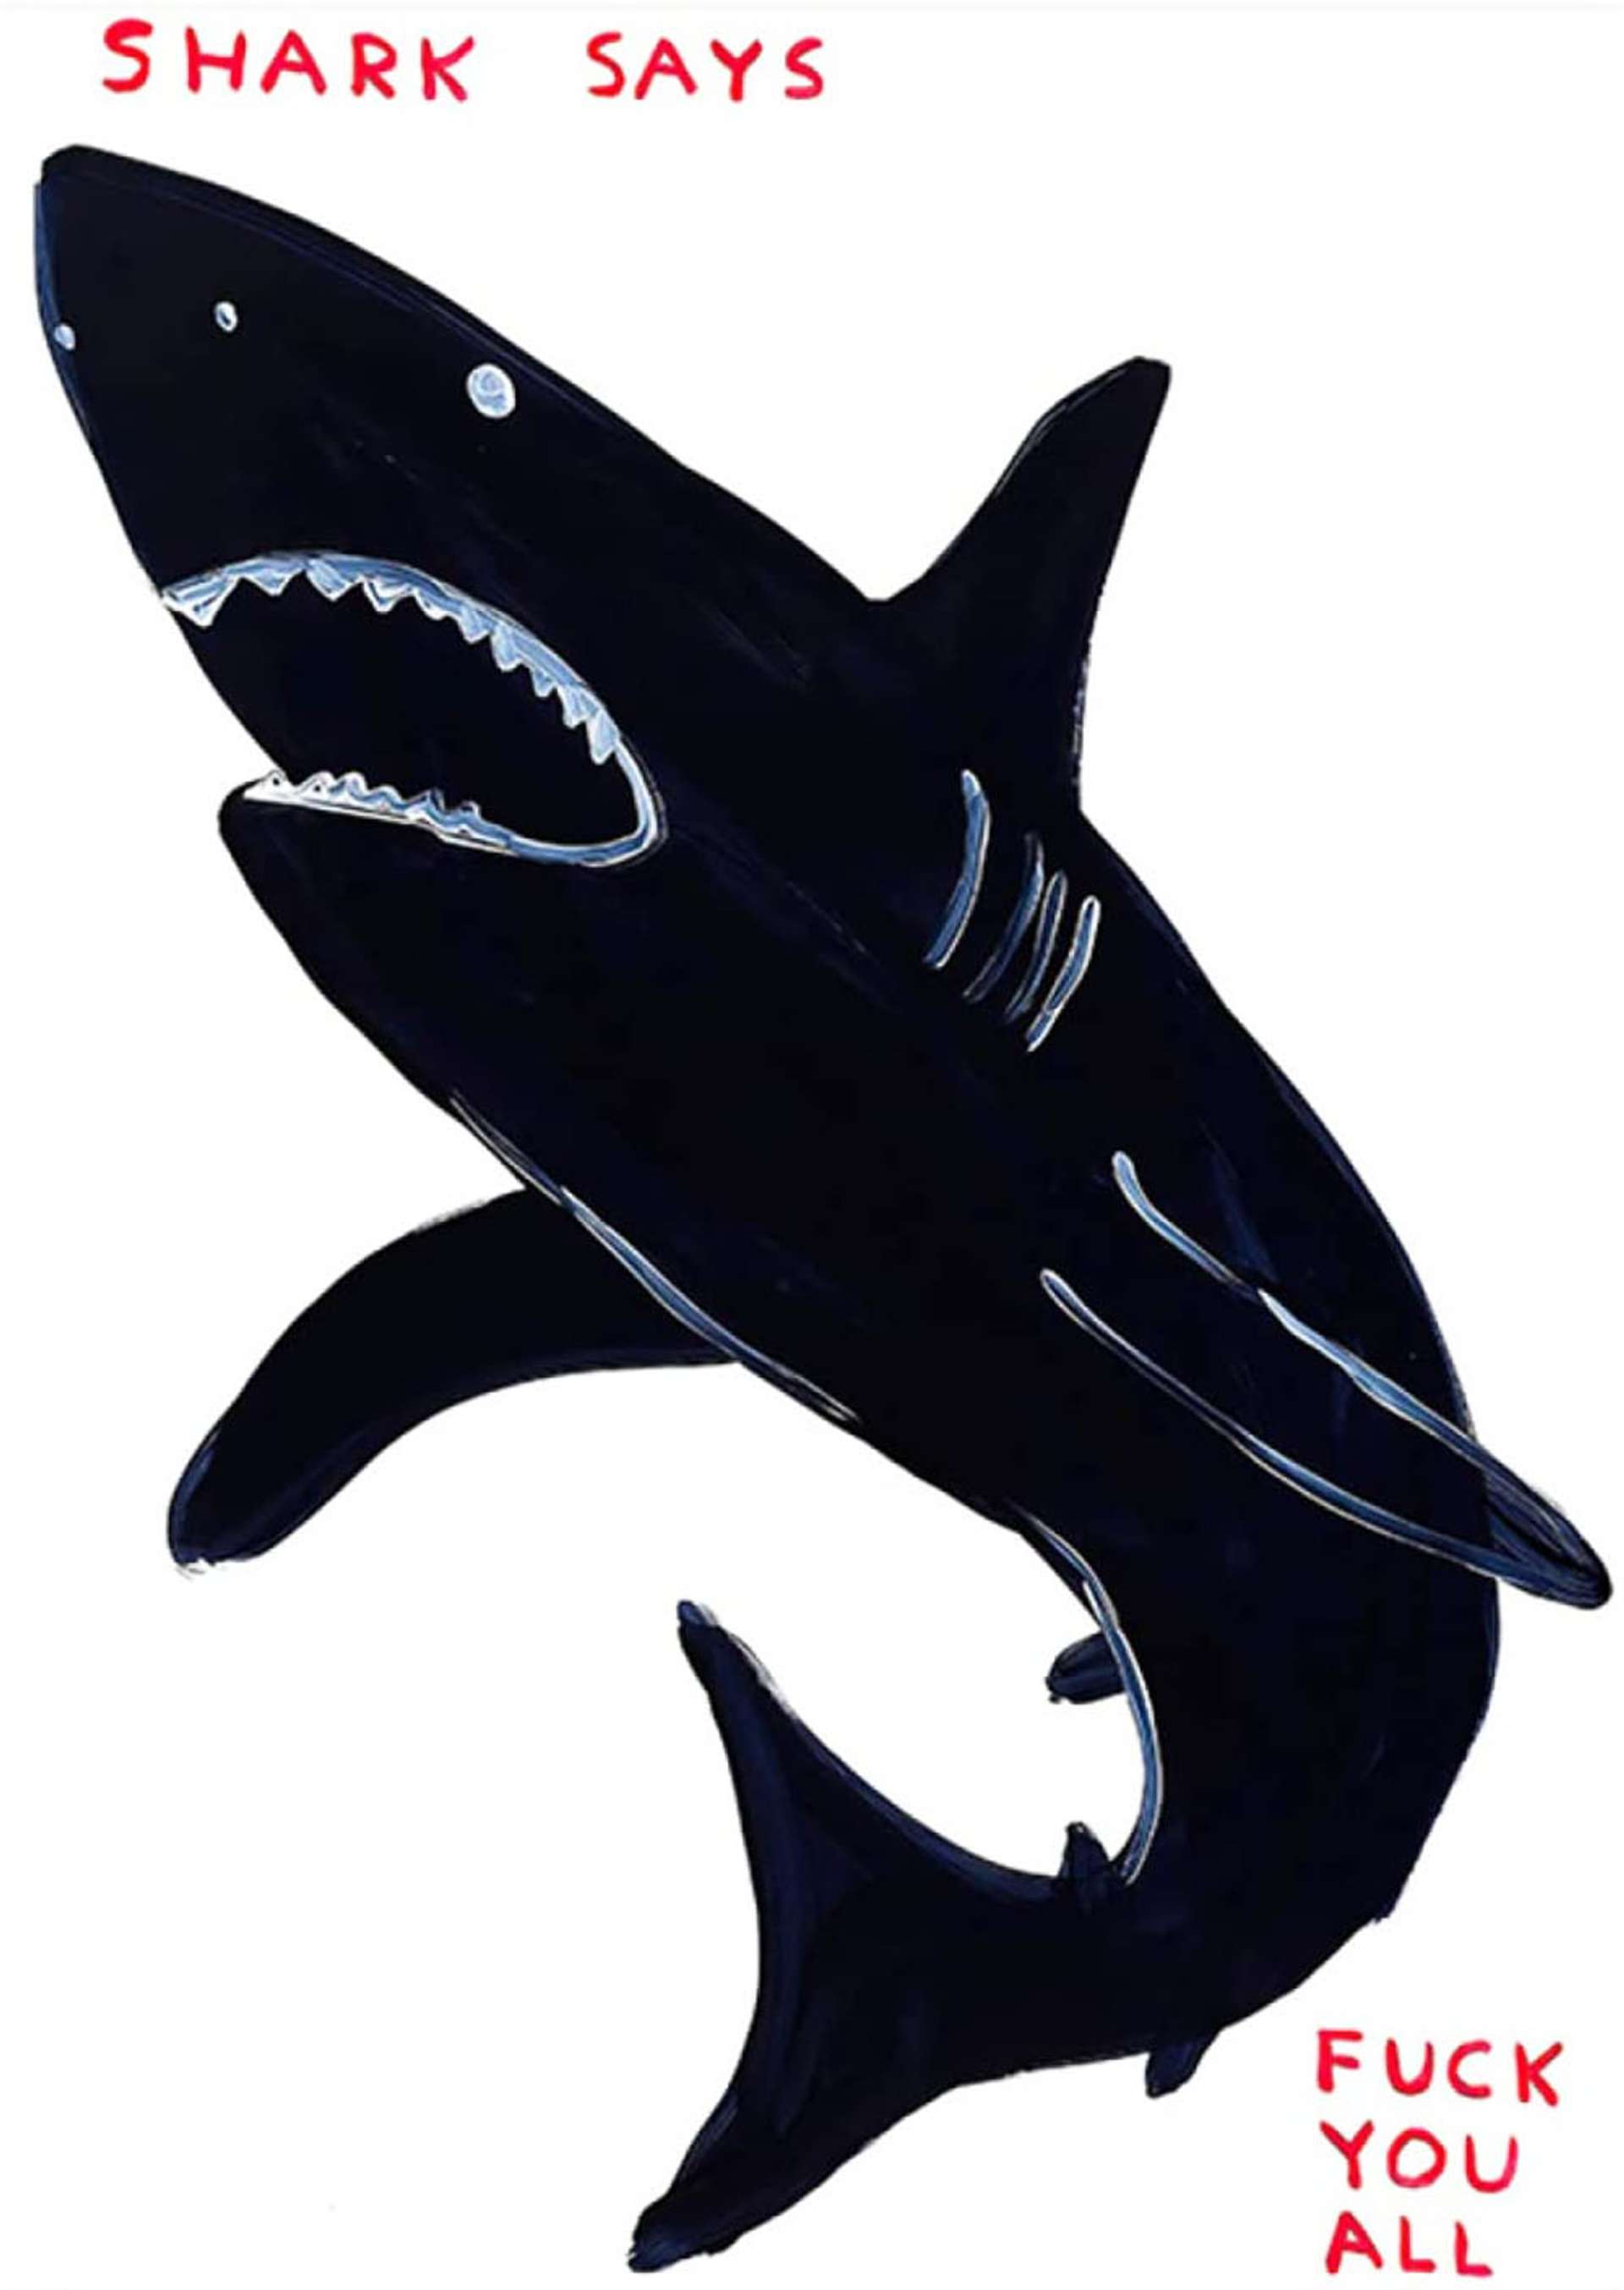 Black shark baring its teeth with “shark says... fuck you all” written in red